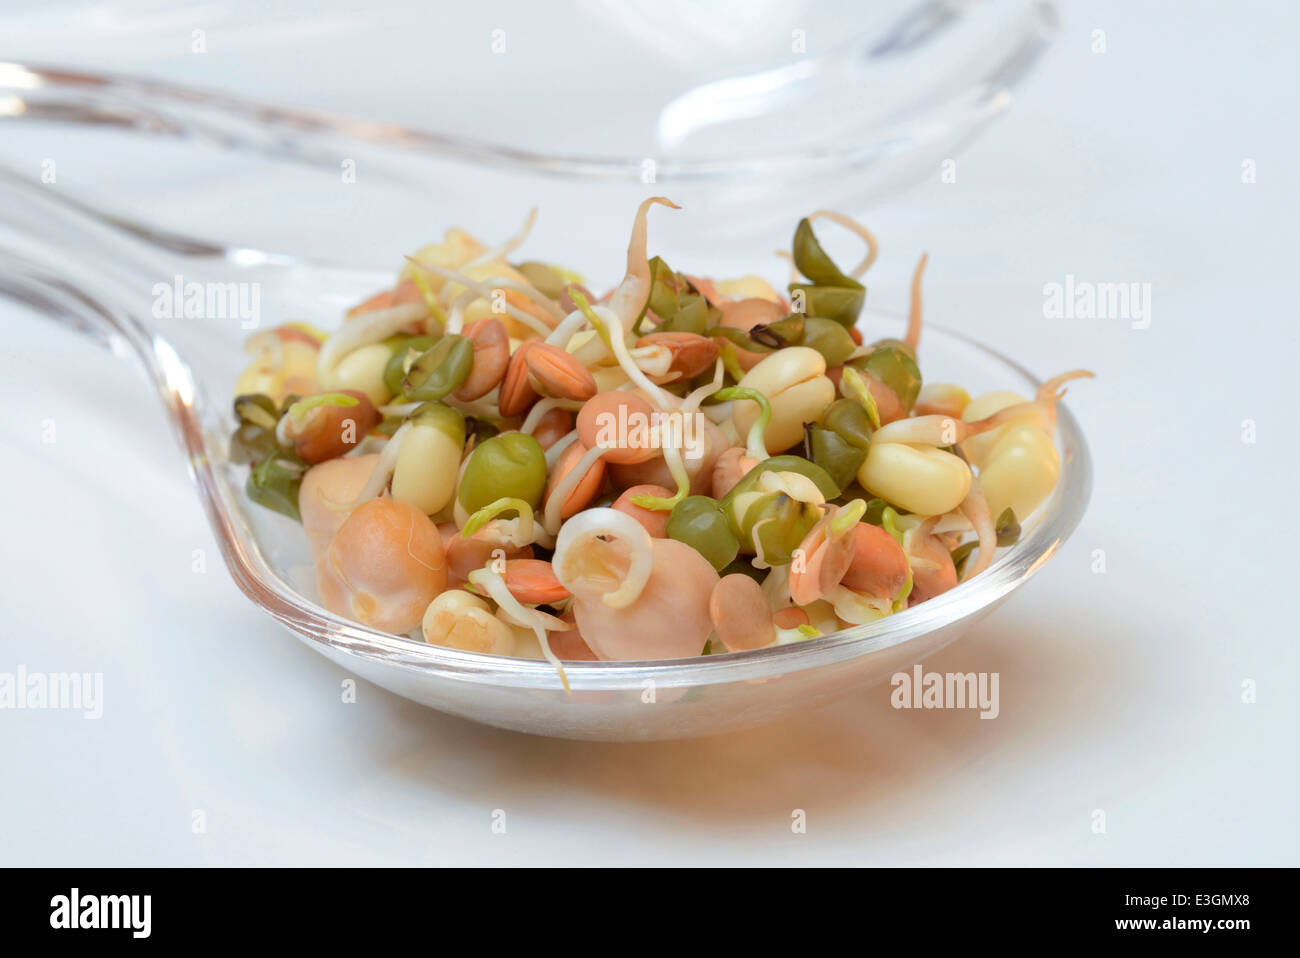 Sprouts mixture Stock Photo